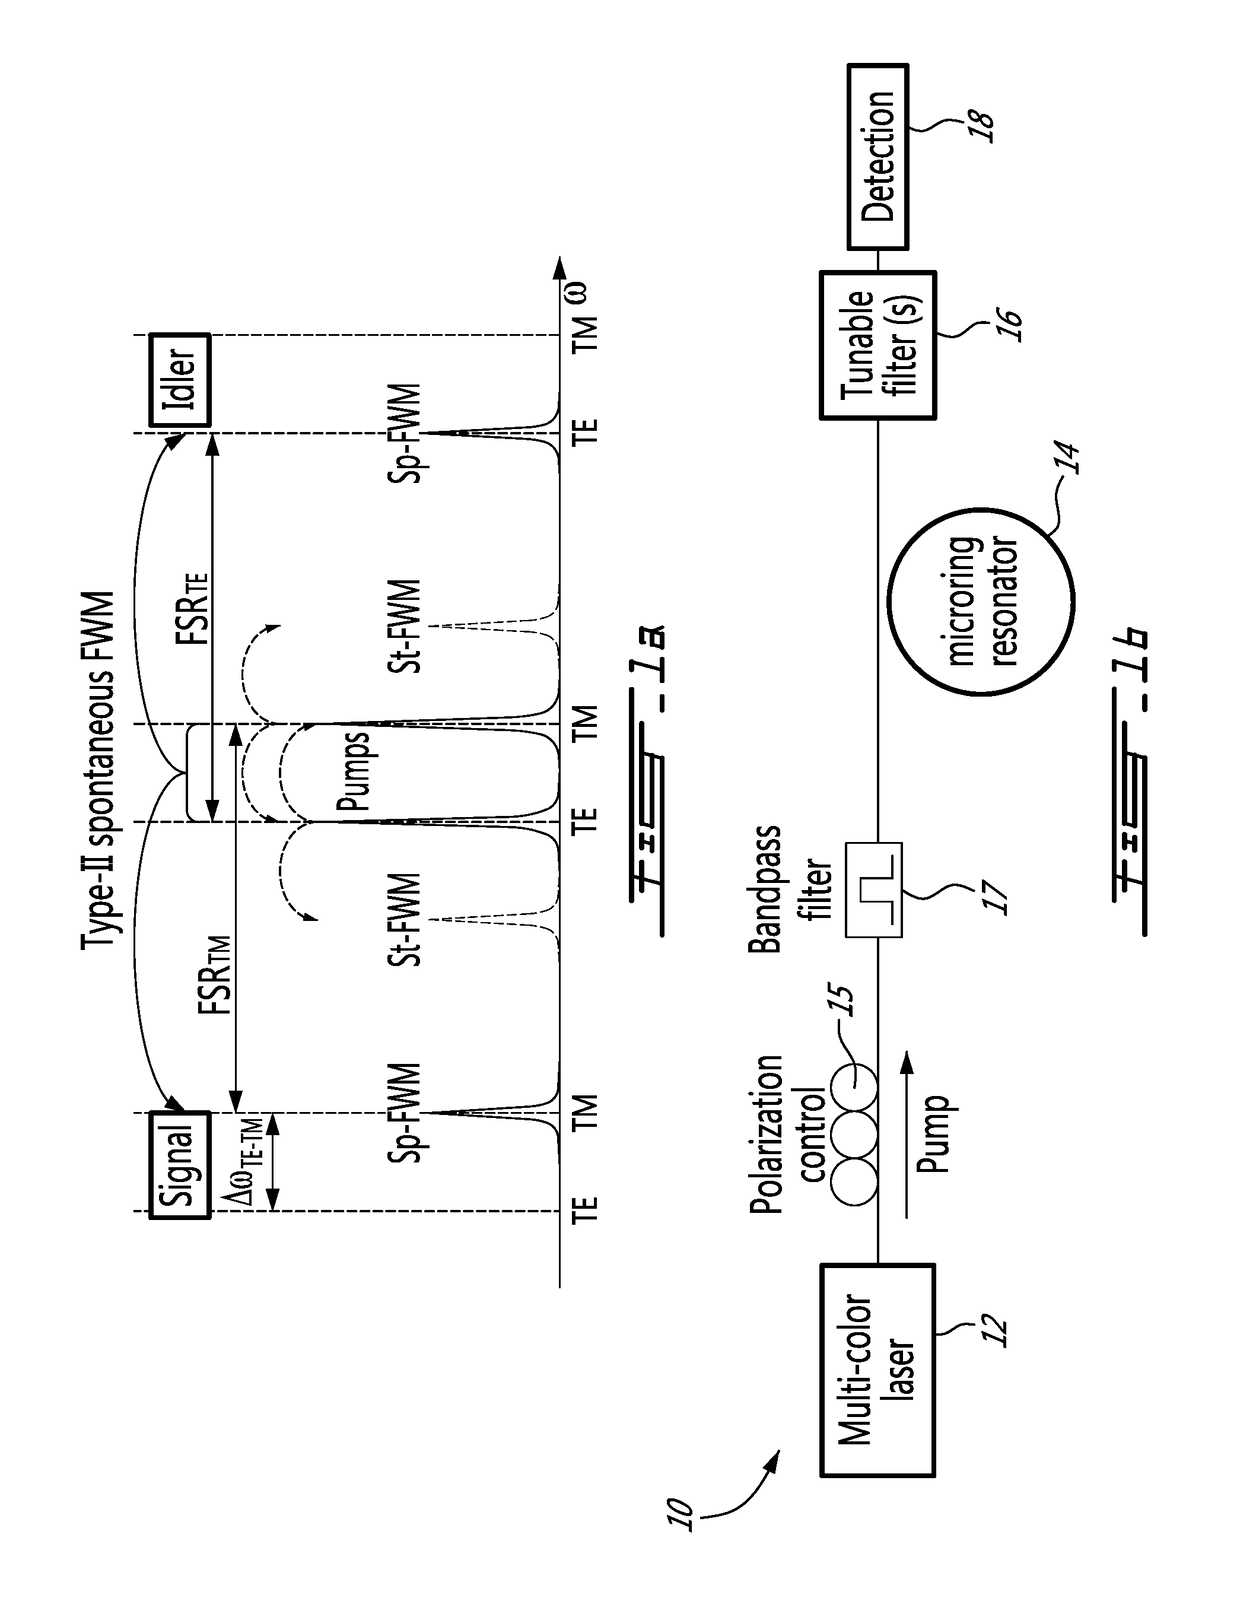 Method and system for the generation of optical multipartite quantum states